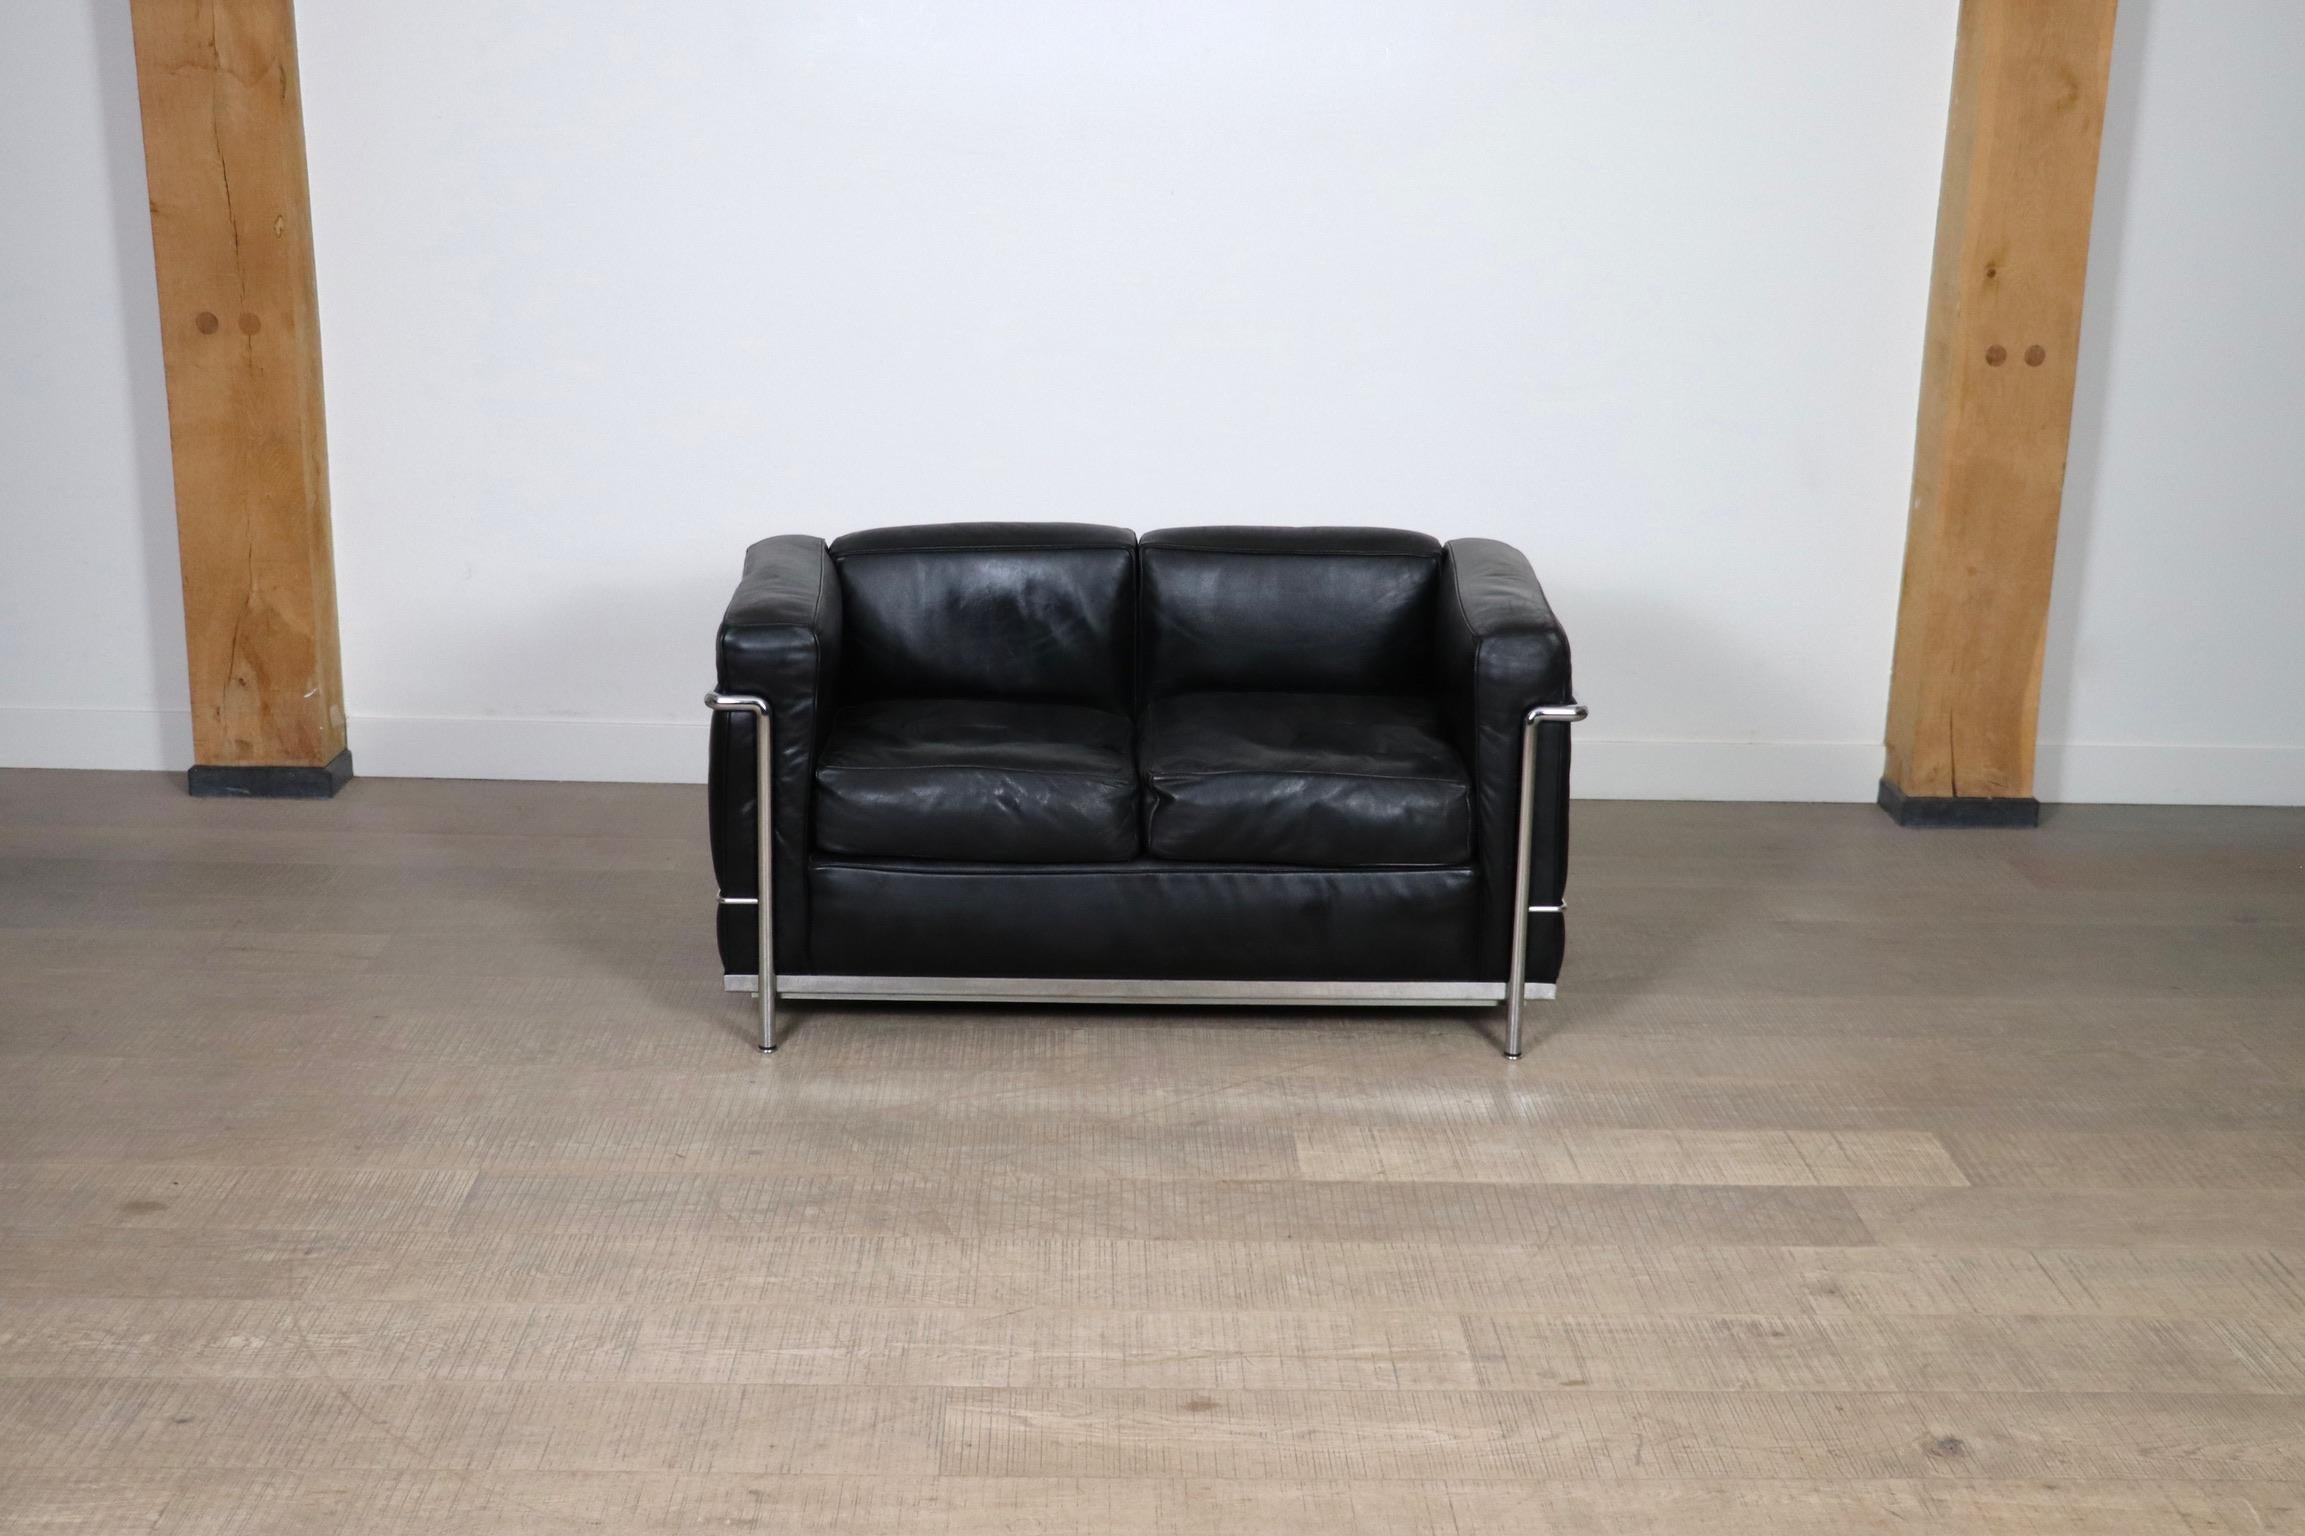 Amazing LC2 two seater sofa, a true design classic by Le Corbusier, Pierre Jeanneret and Charlotte Perriand, originally designed in 1928. The modern sofa is composed of a tubular chrome frame and high-end black leather cushions. Both sofas are